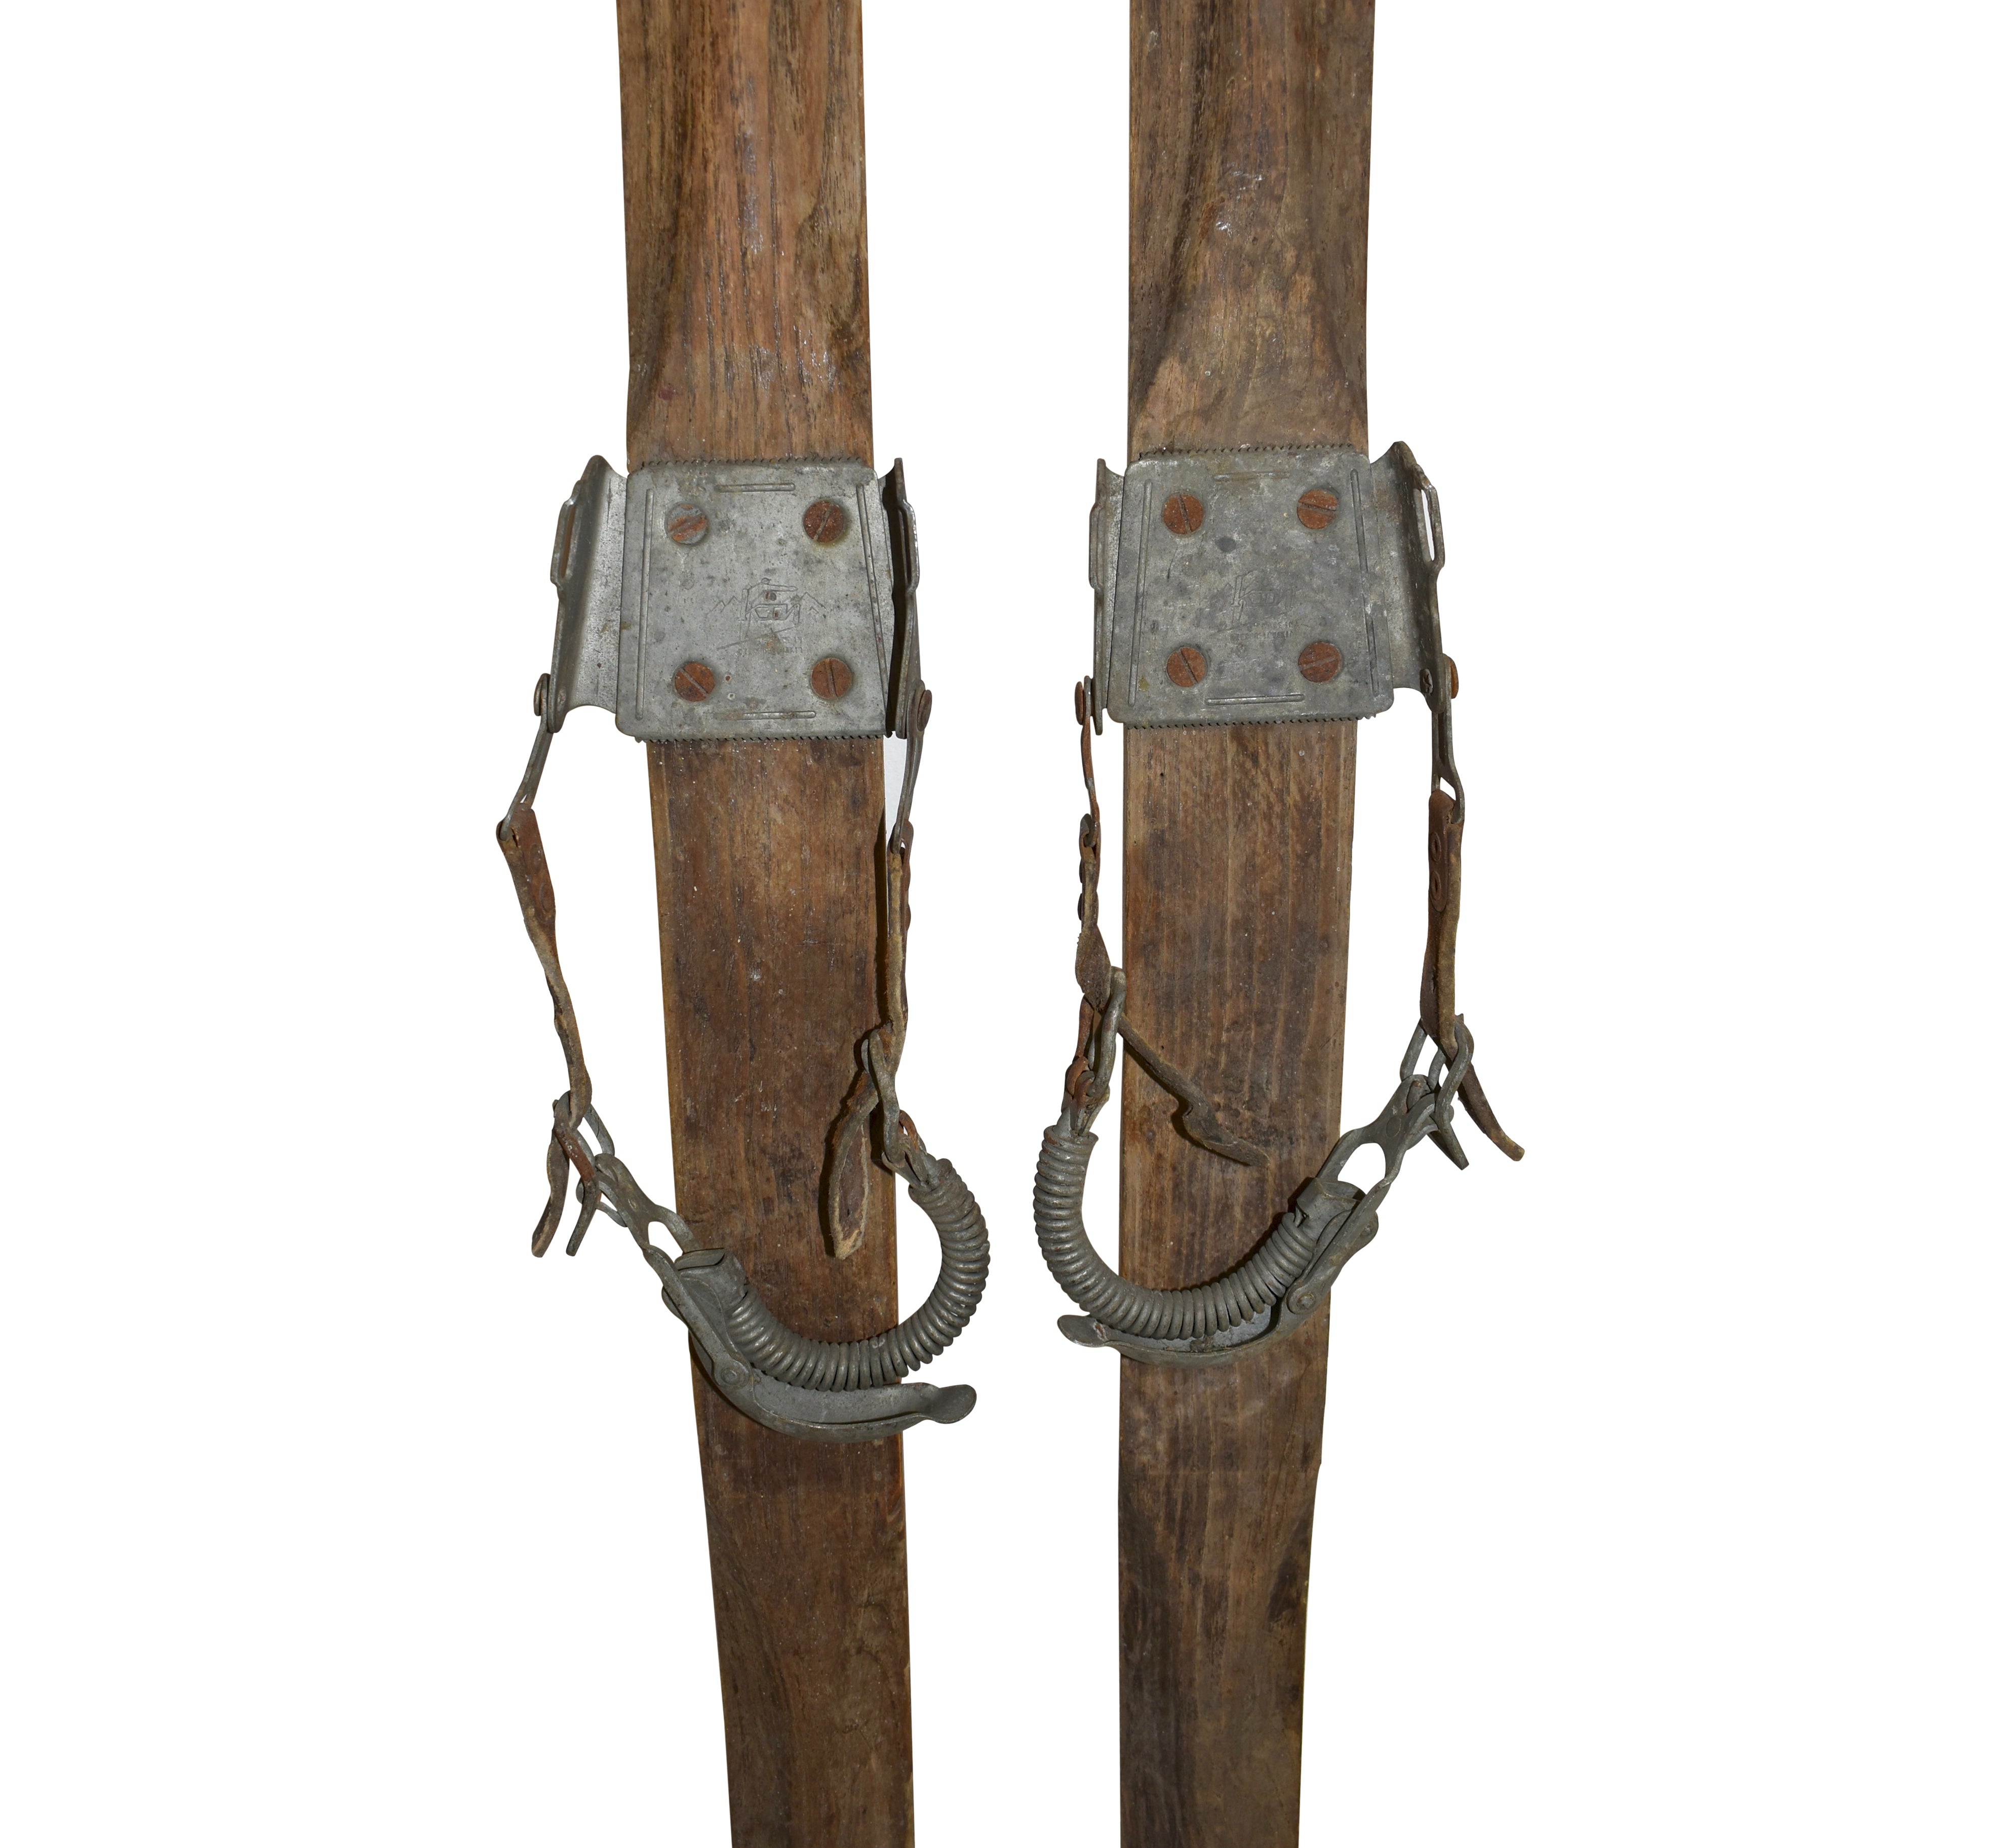 Czech Skis with Cable Bindings